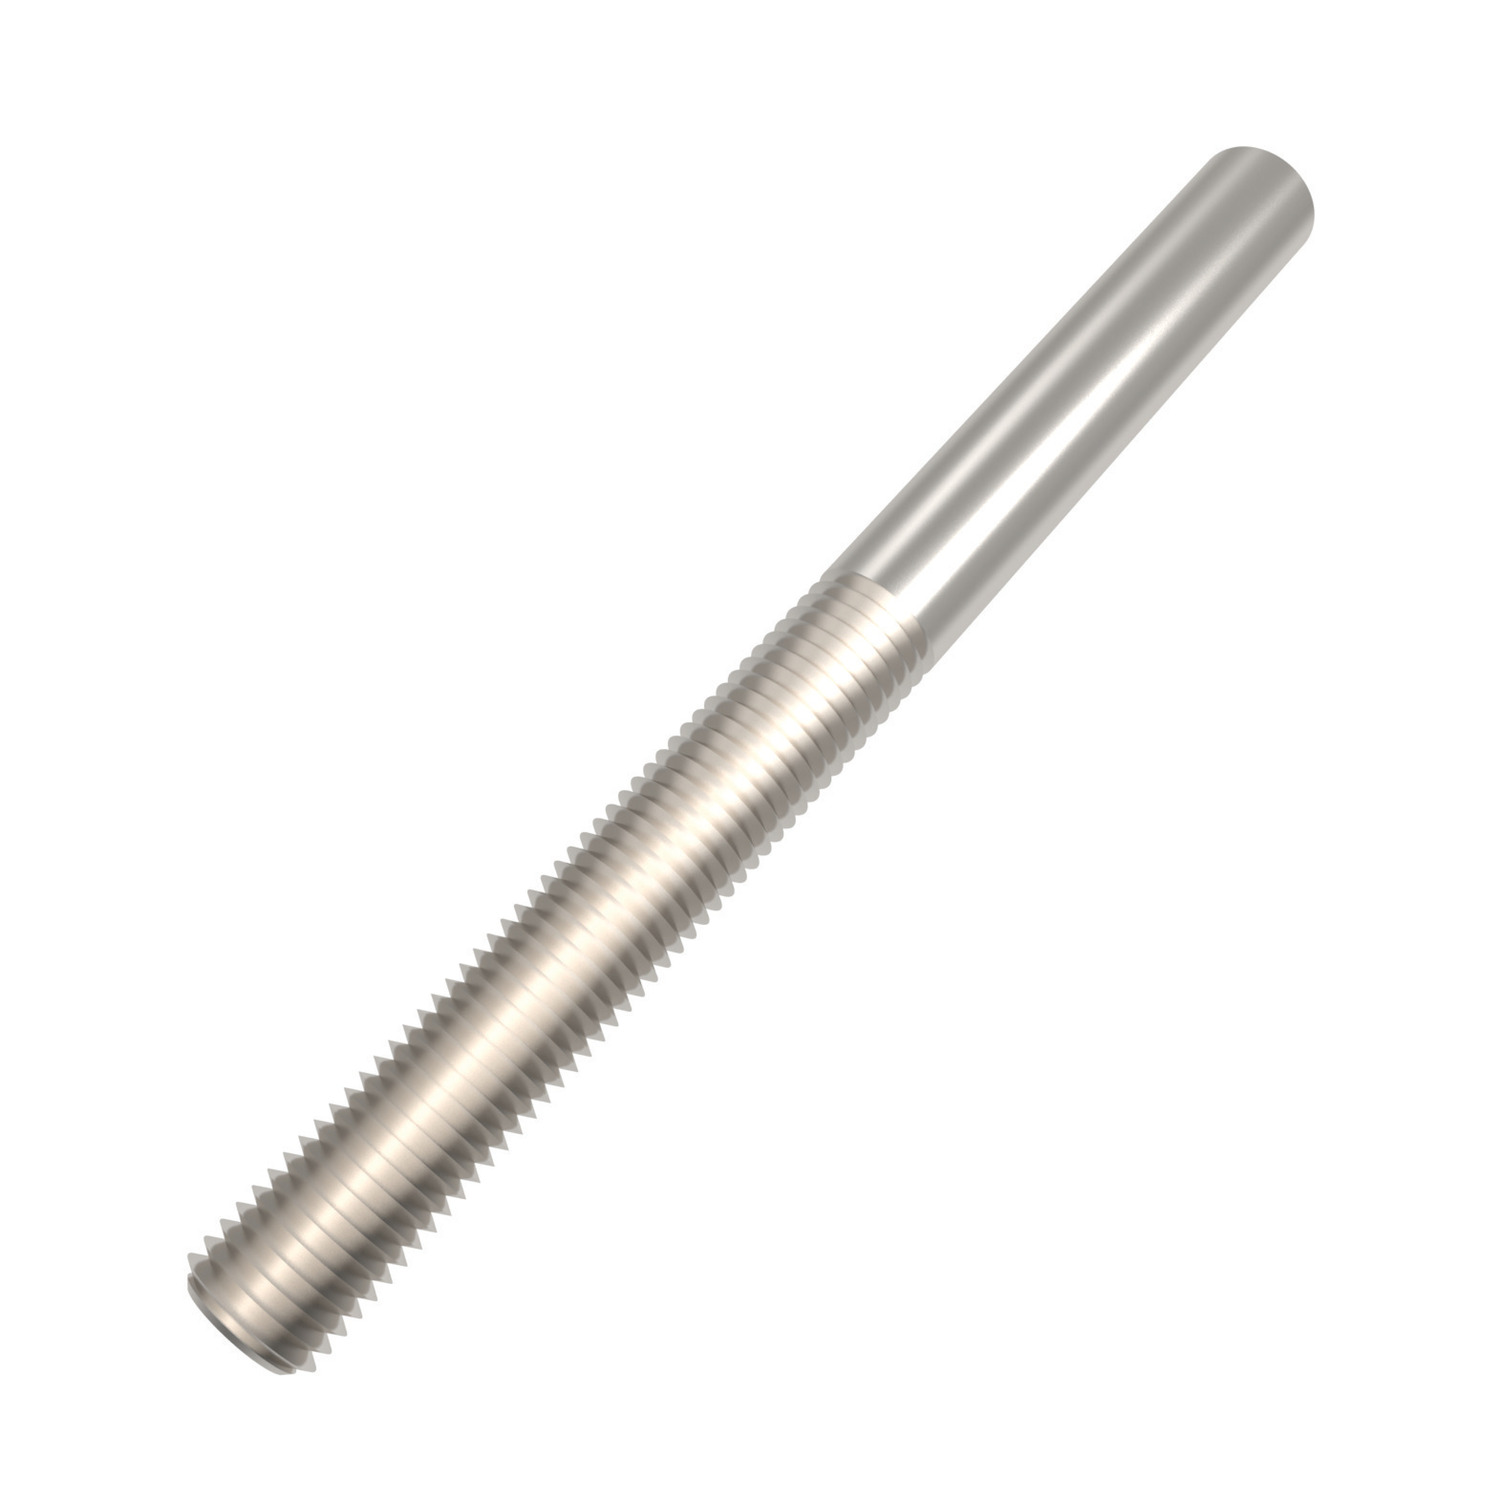 R3868.R006-A4 Welding Studs RH M6 A4 s/s Not to be used for lifting unless SWL marked.